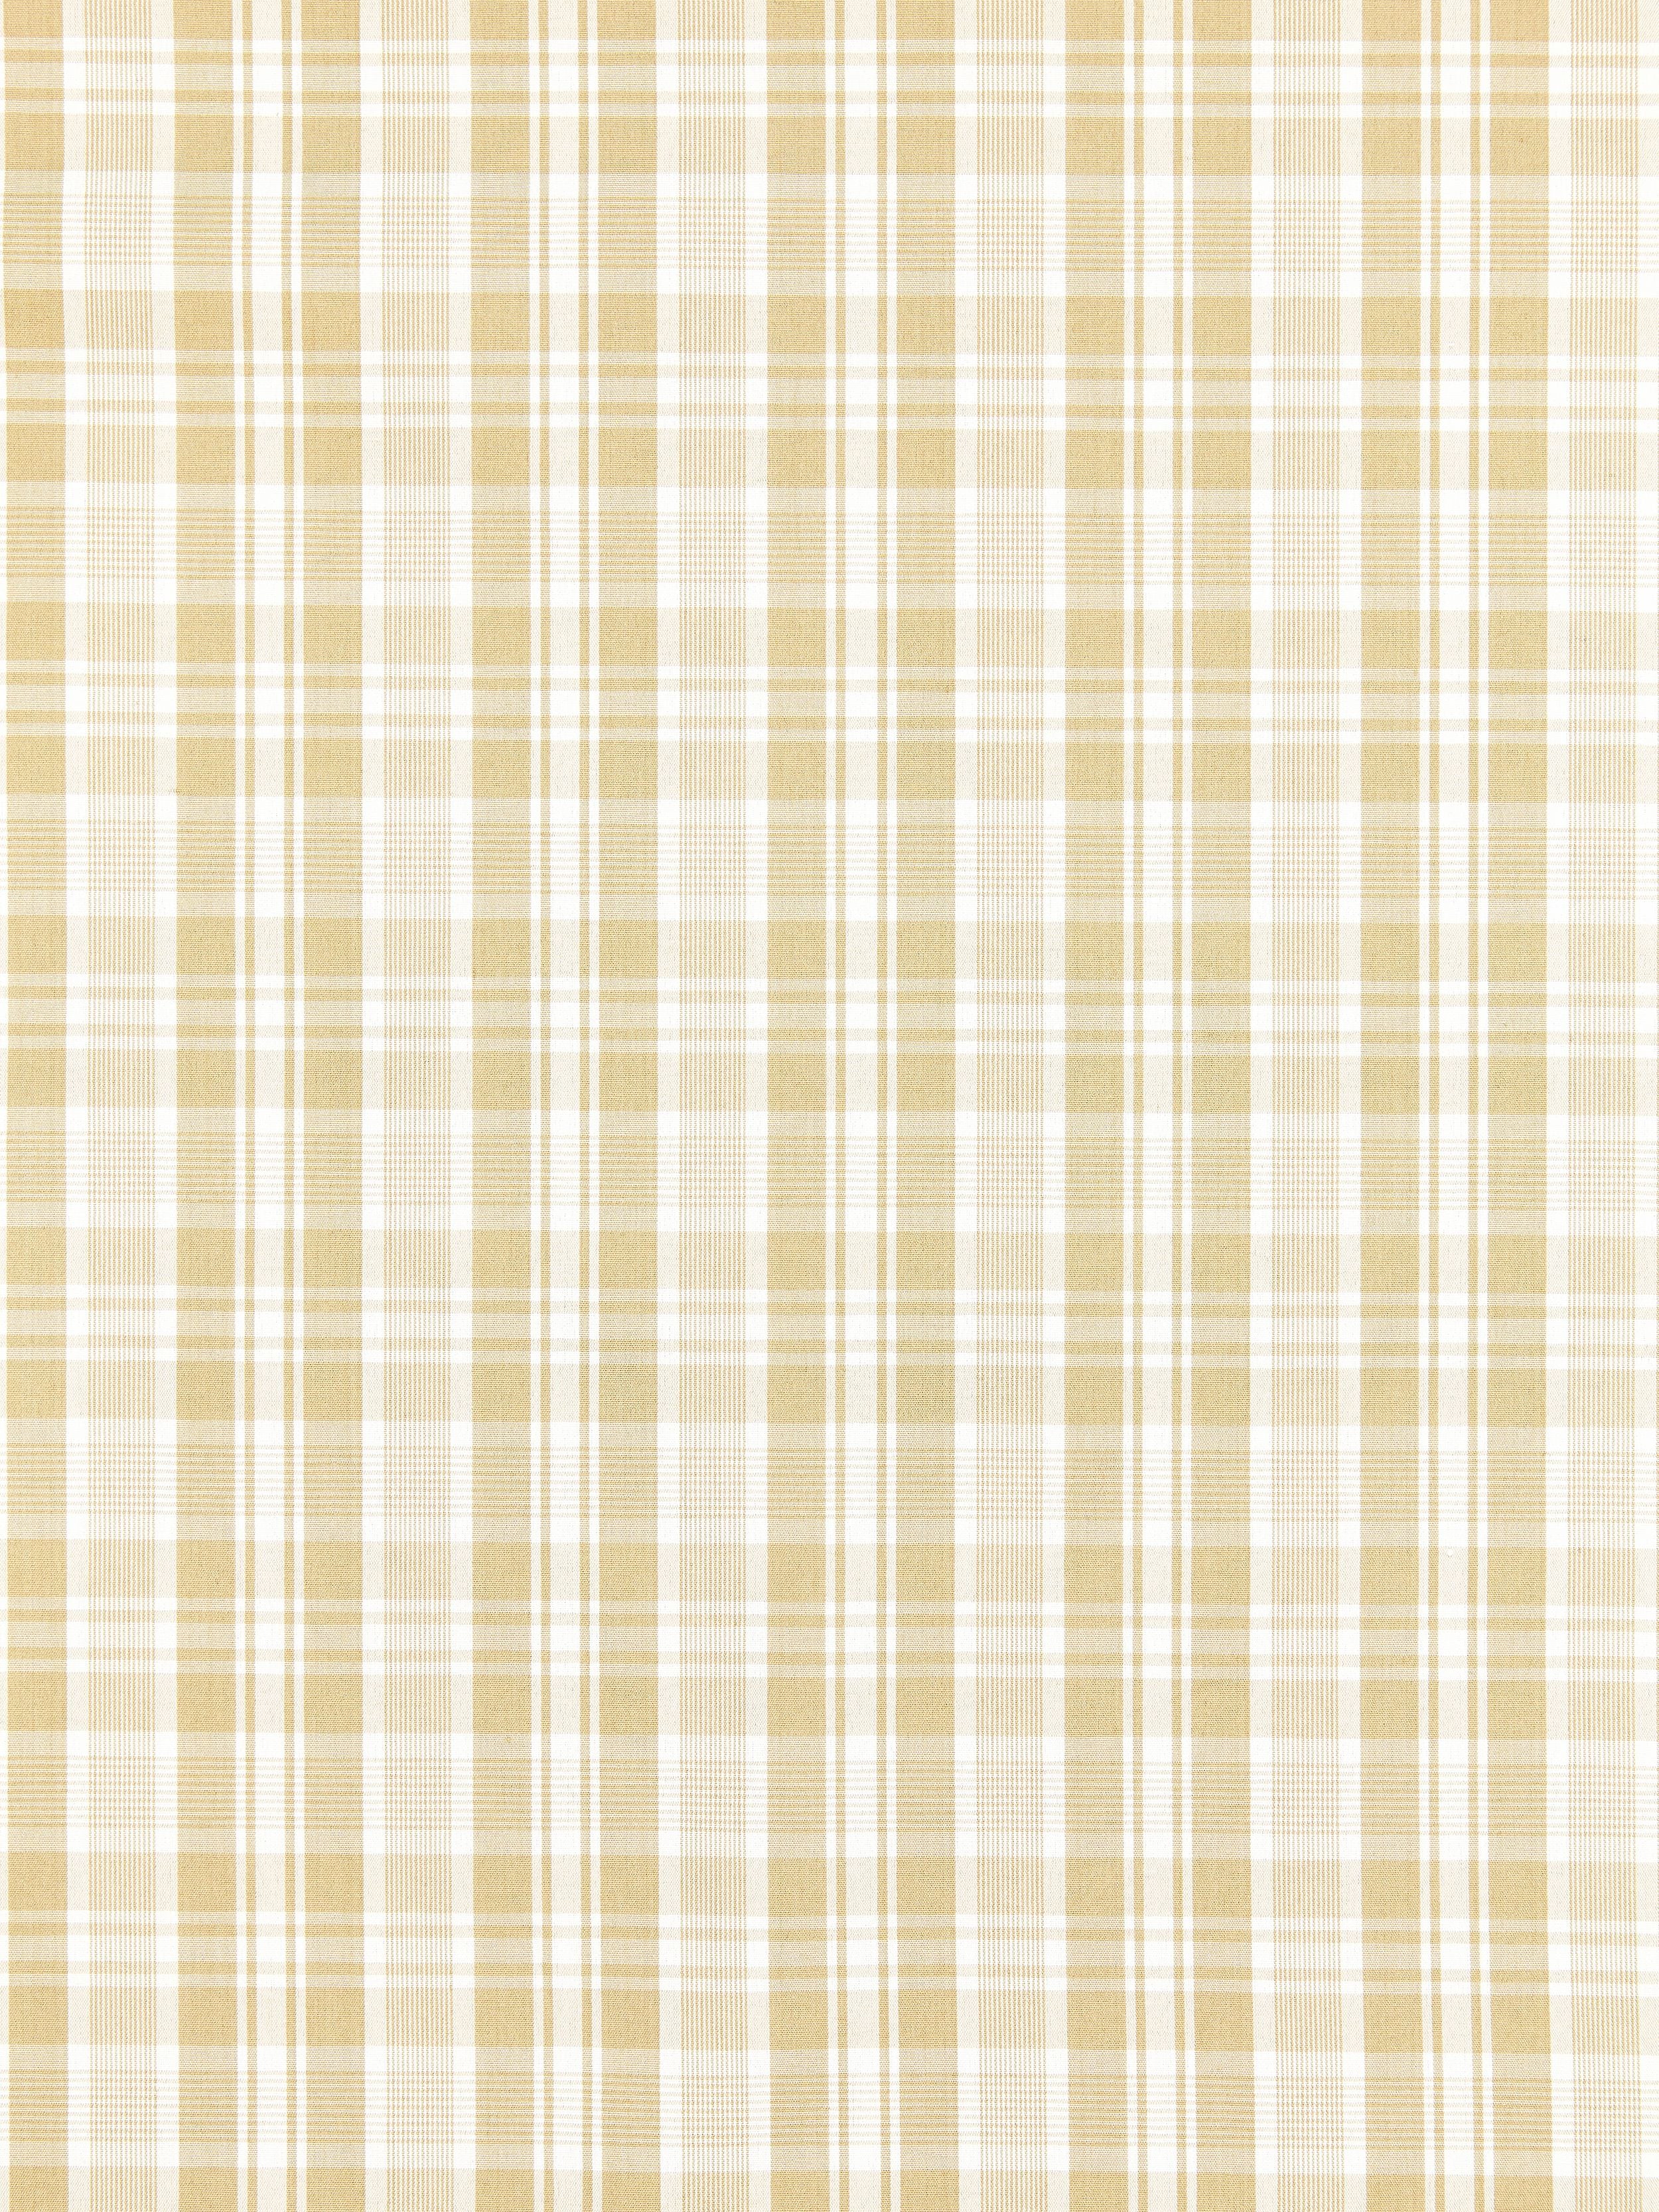 Preston Cotton Plaid fabric in camel color - pattern number SC 000127122 - by Scalamandre in the Scalamandre Fabrics Book 1 collection